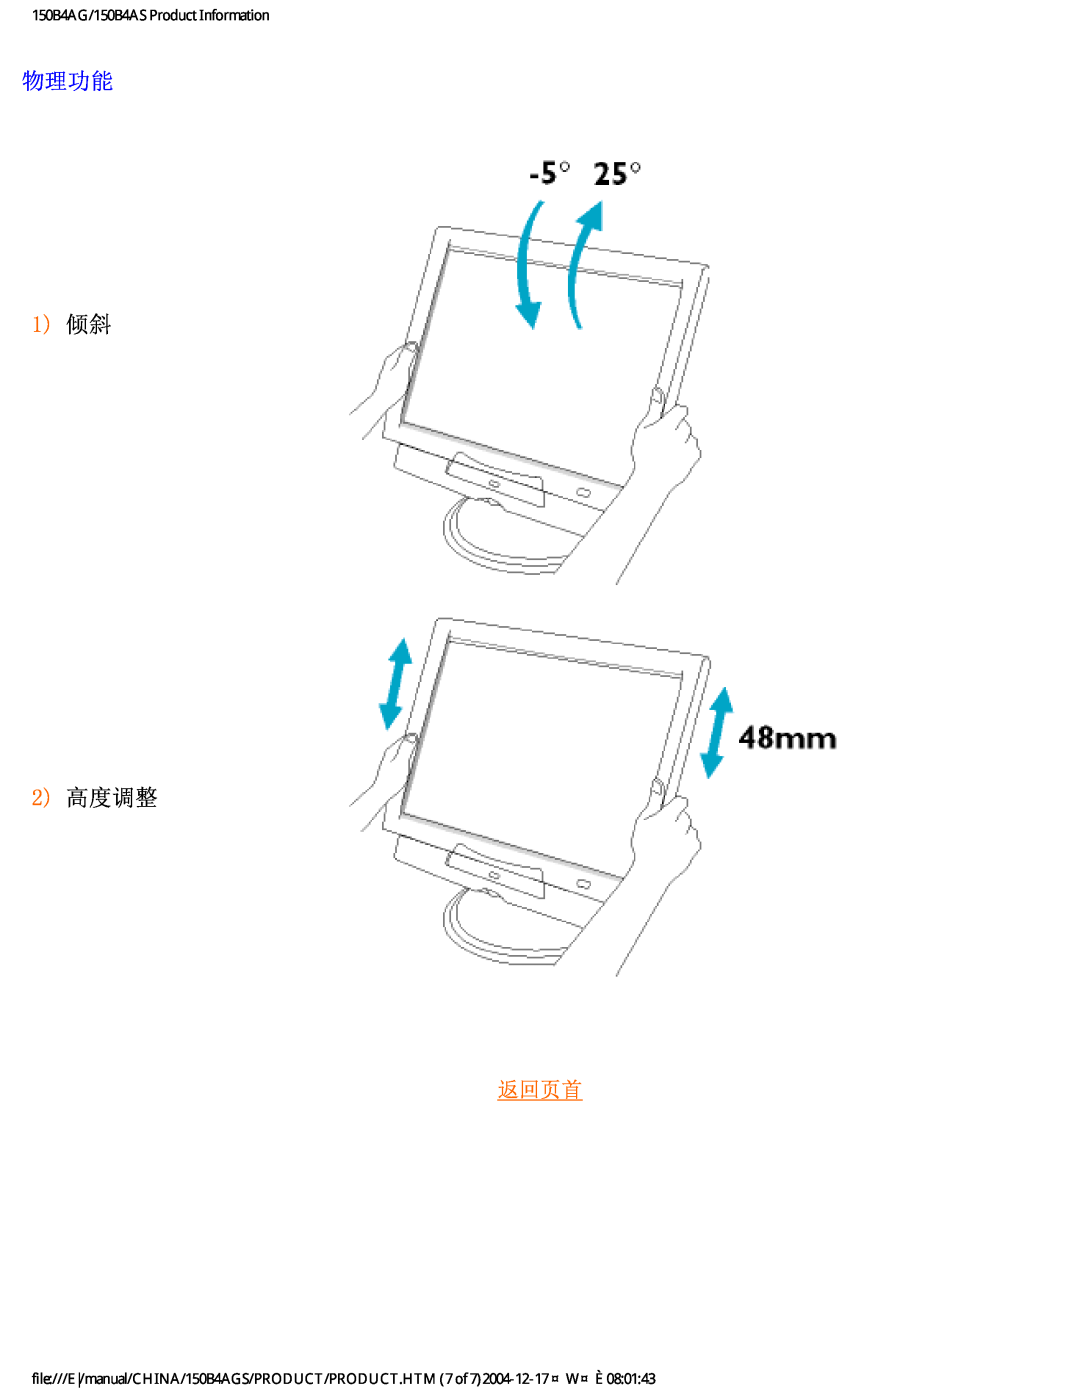 Philips user manual 物理功能, 1倾斜 2高度调整, 返回页首, 150B4AG/150B4AS Product Information 